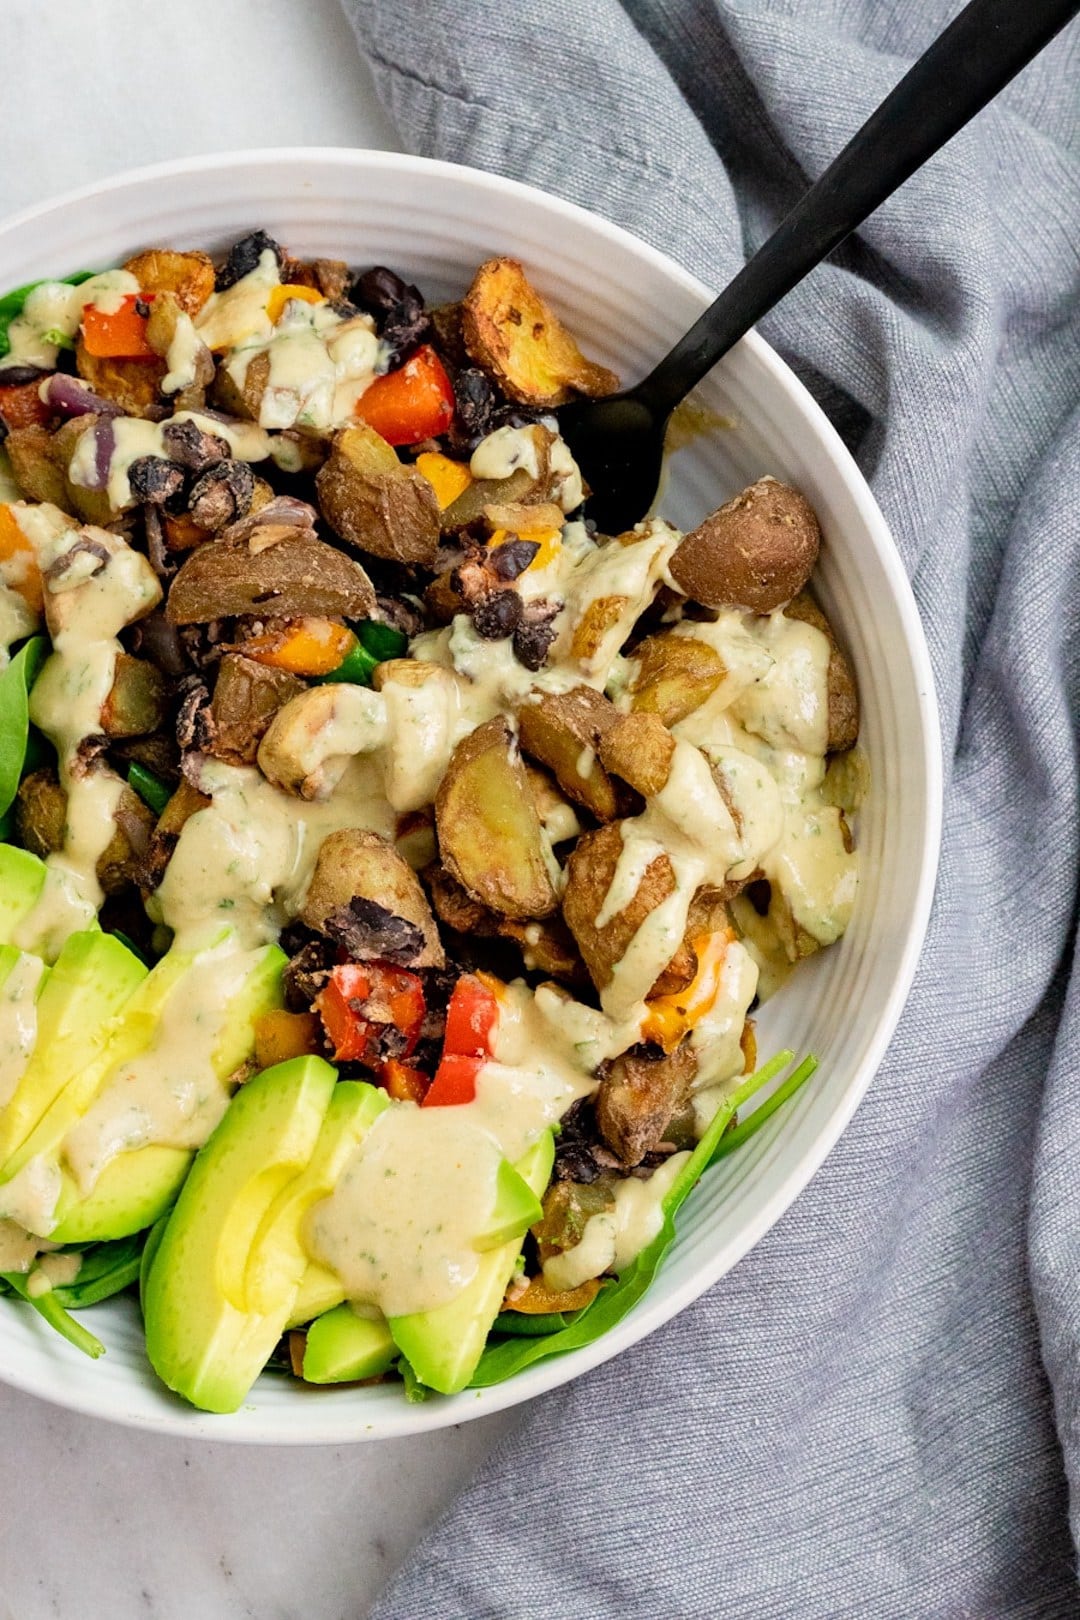 image of a bowl filled with air fryer breakfast potatoes, avocado, and vegetables, drizzled with sauce